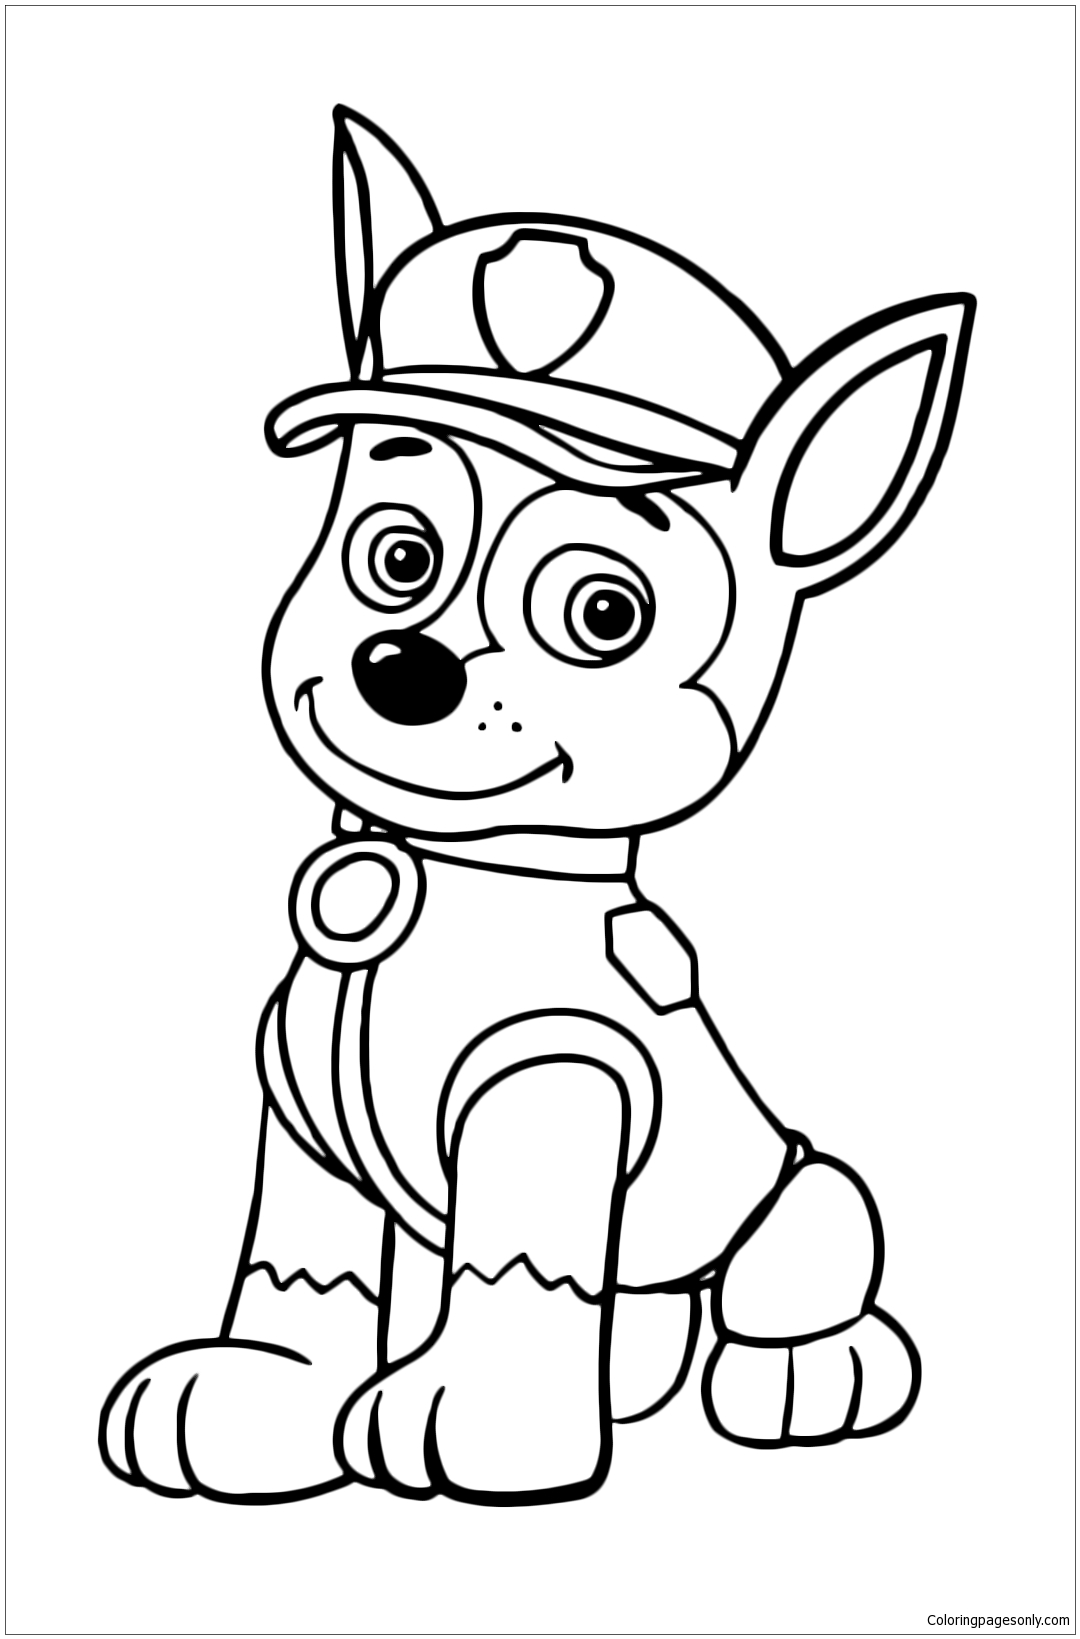 K9 Police Car Coloring Pages - Free Coloring Pages